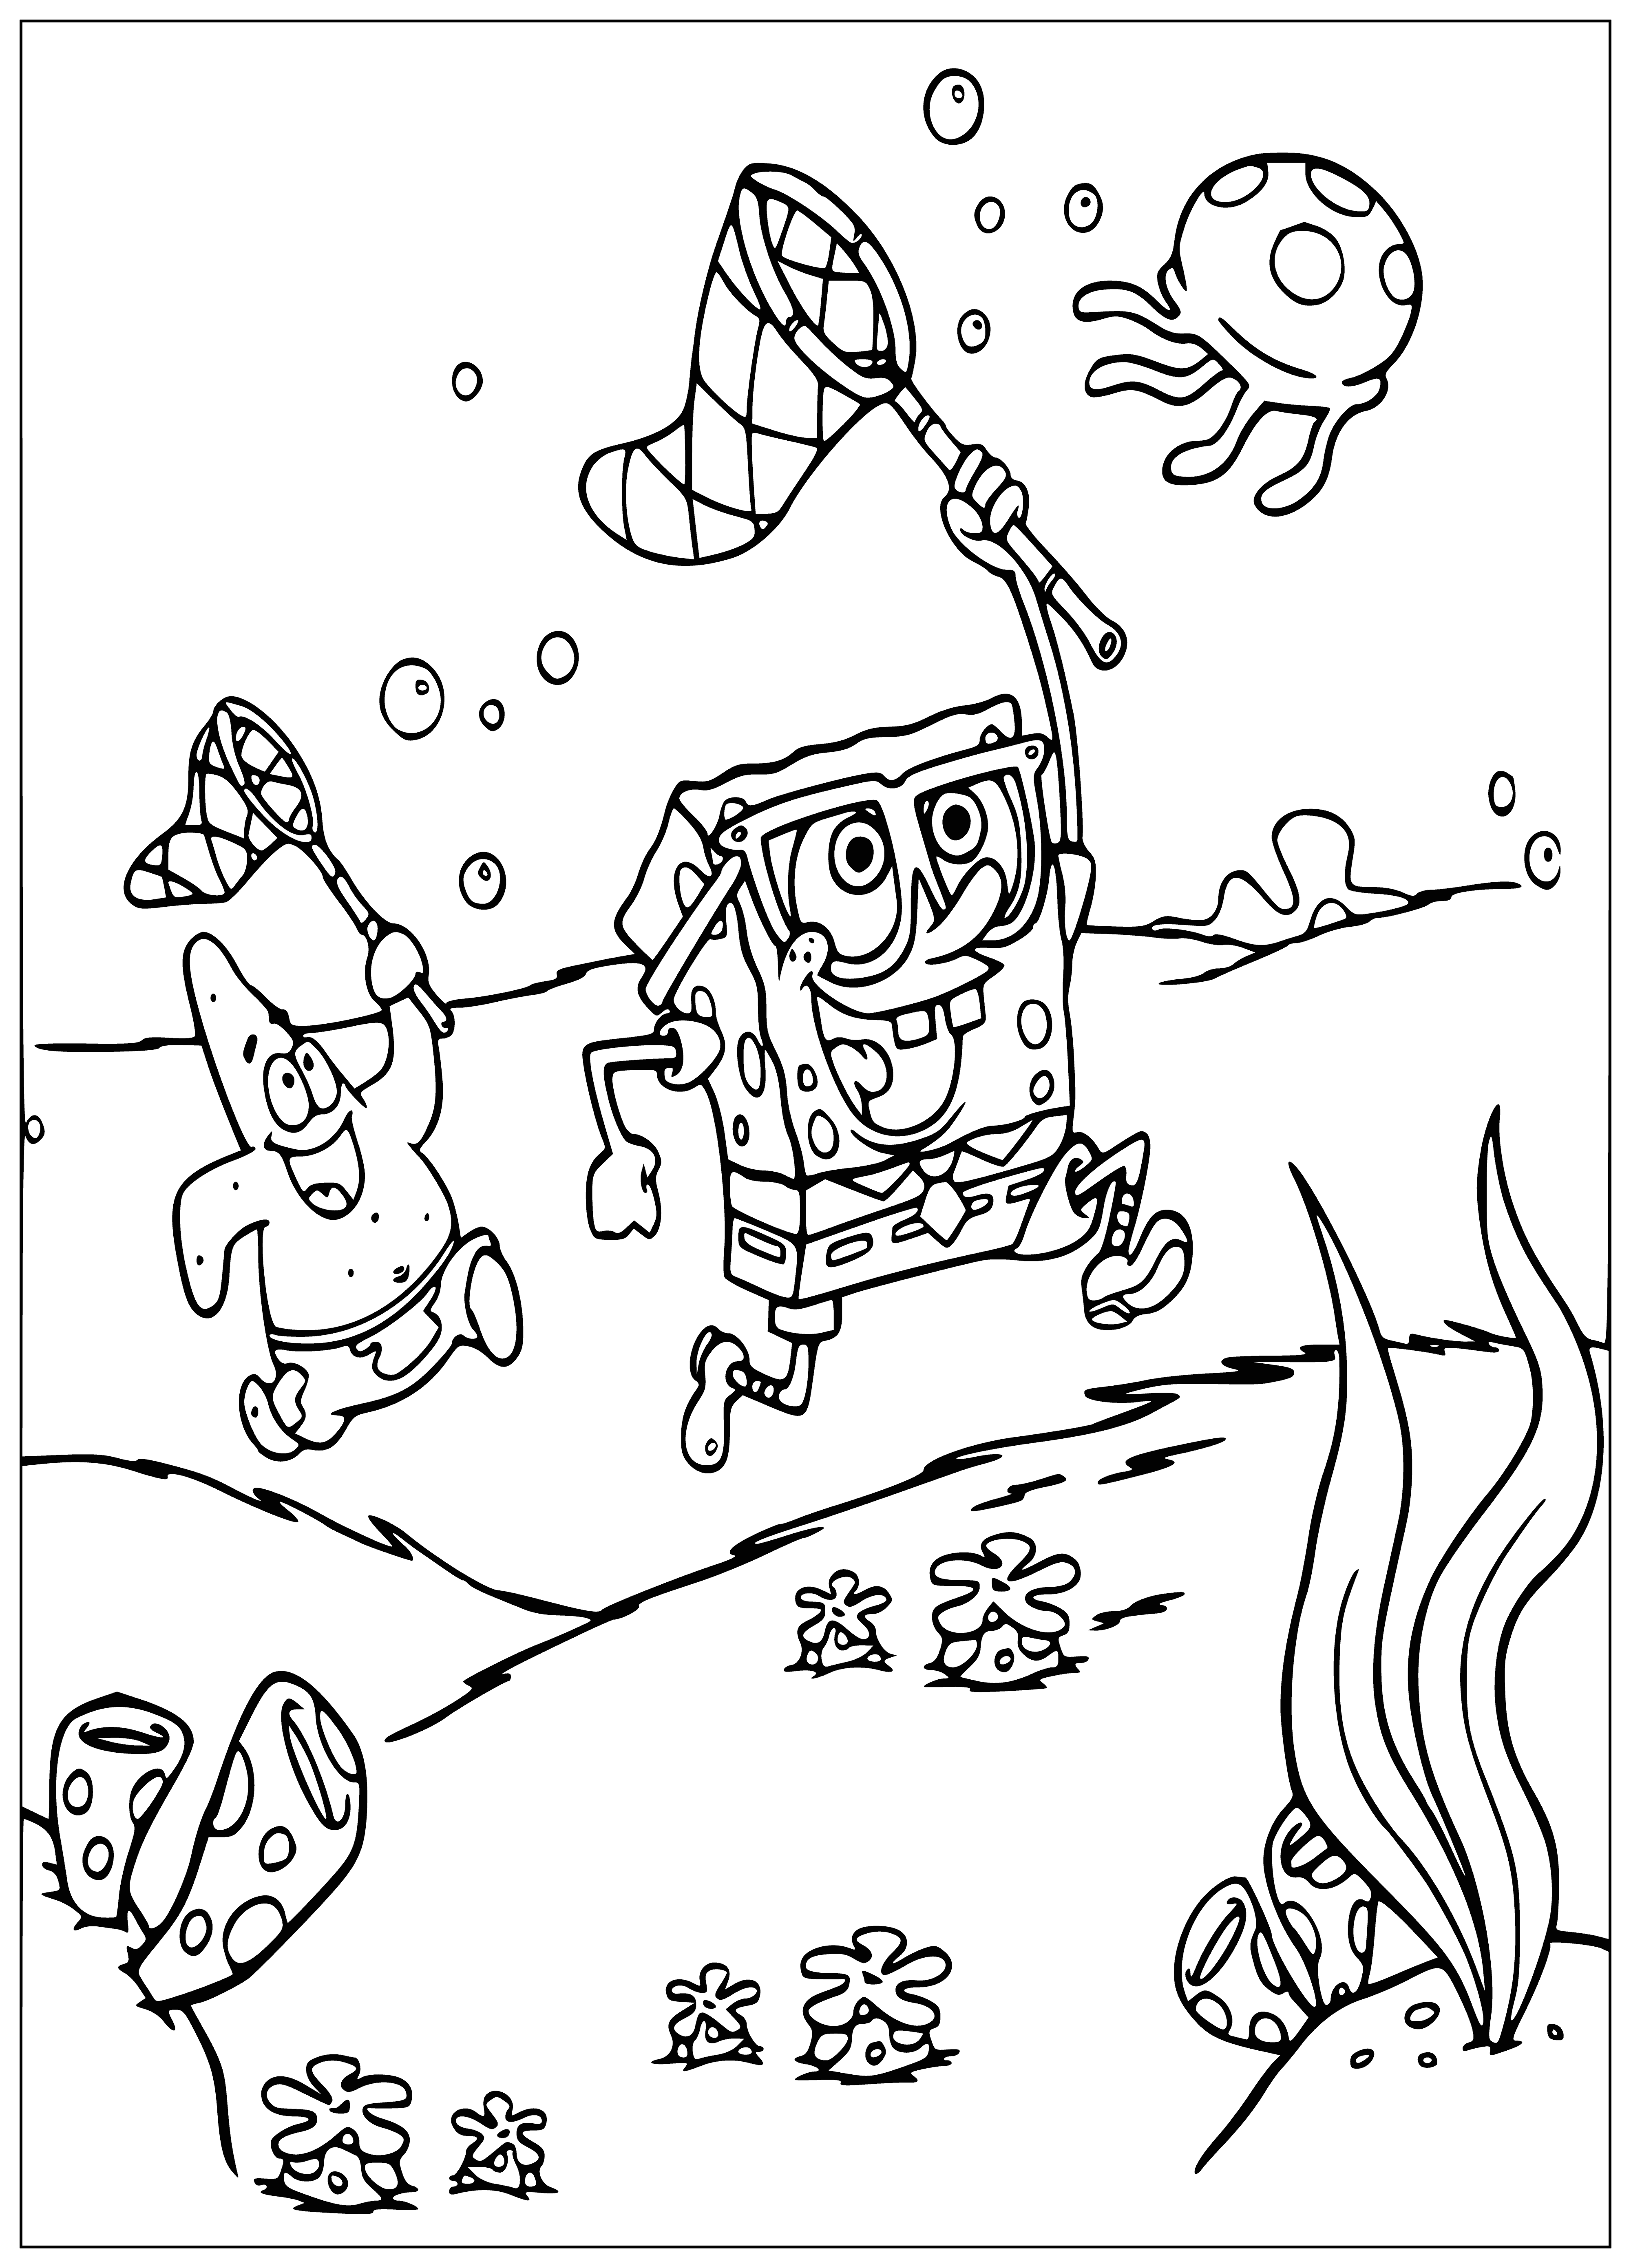 Friends catch jellyfish coloring page